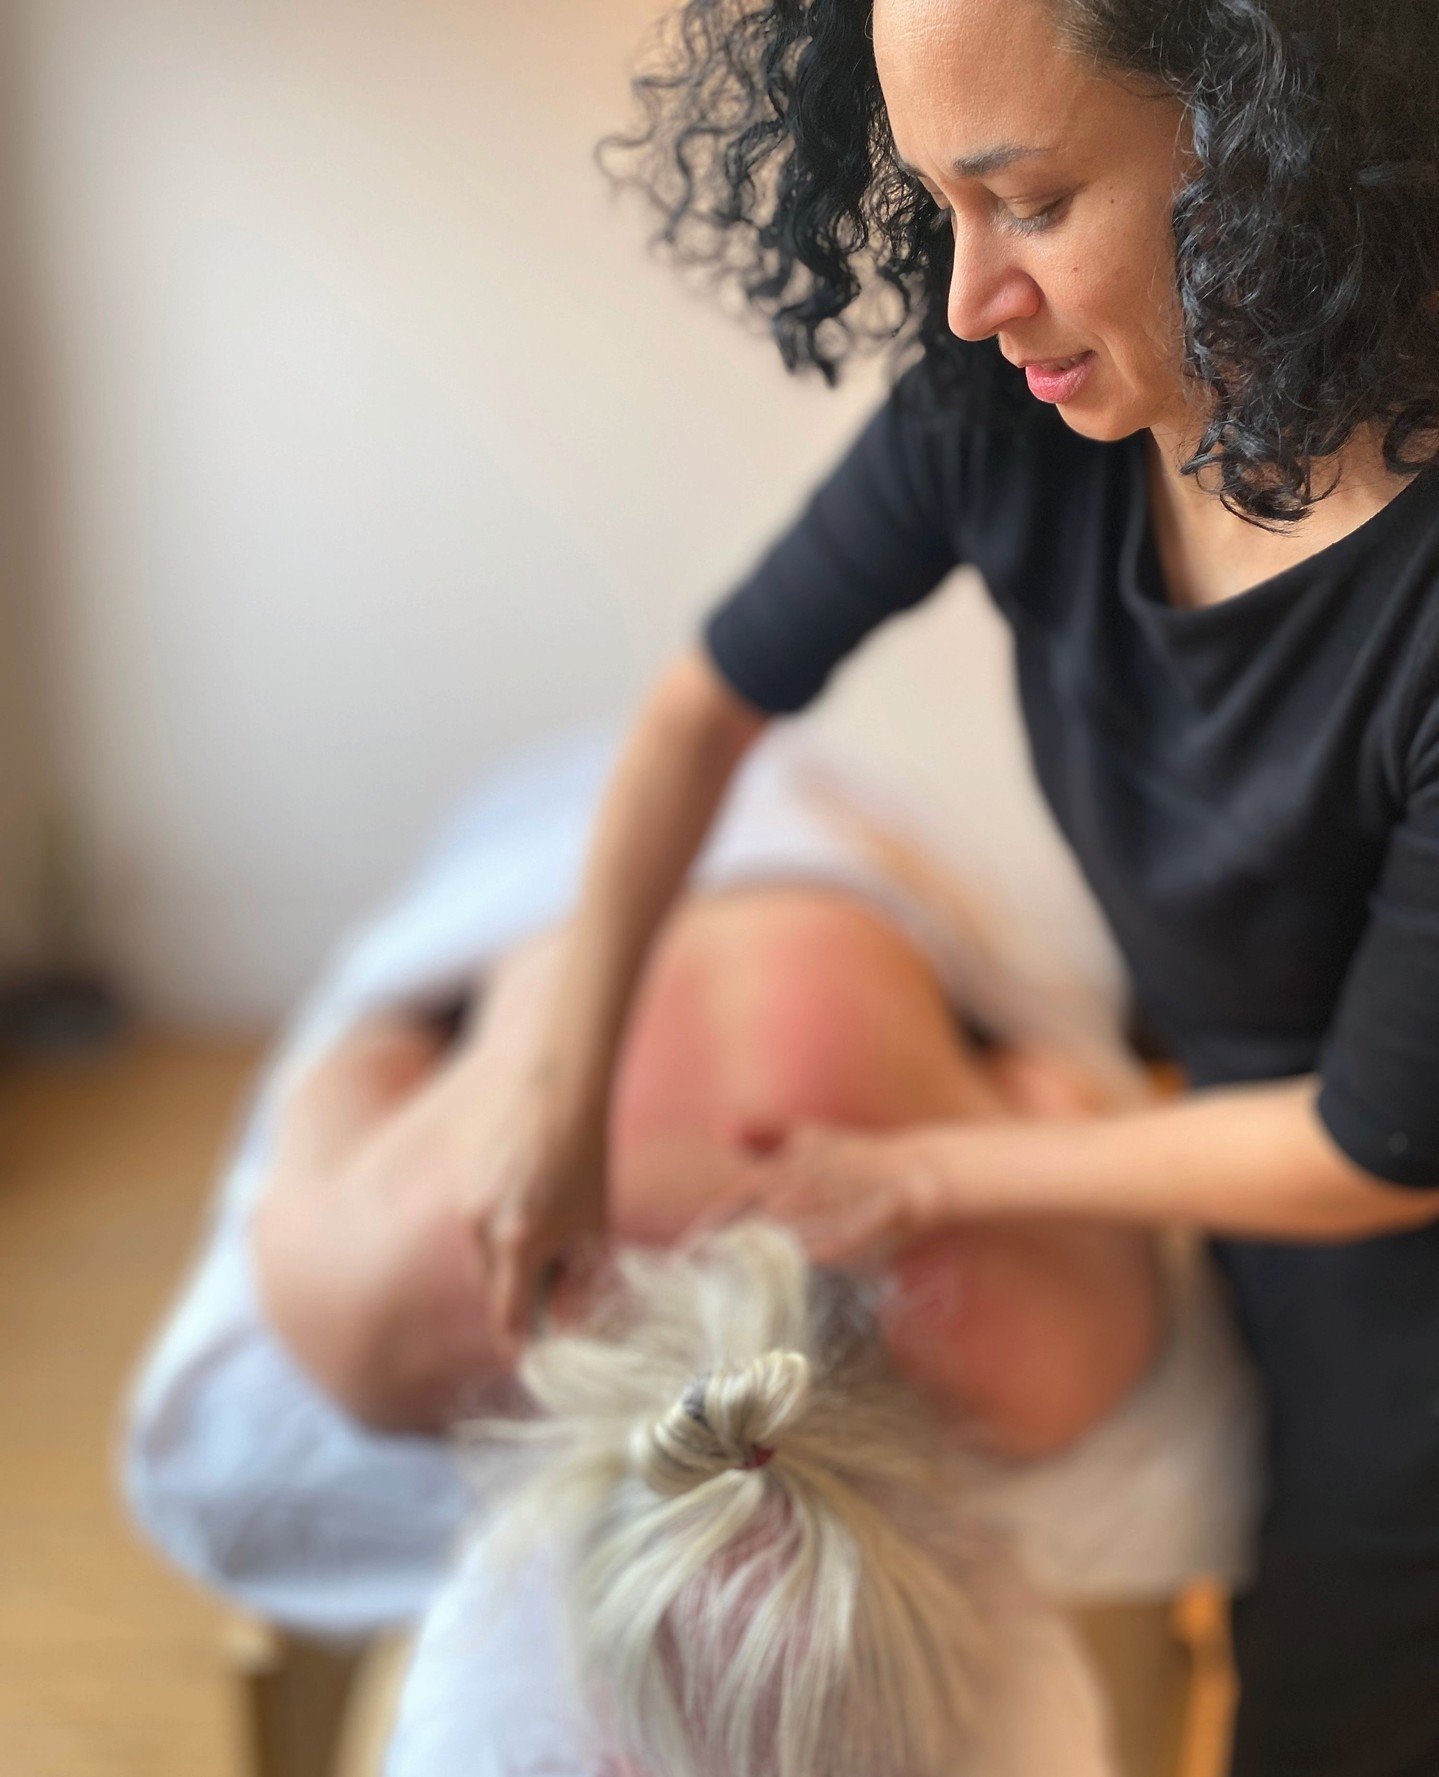 We're thrilled to unveil our latest offering, TCM ATTUNEMENT⁠
⁠
__ What is TCM ATTUNEMENT?⁠
A massage experience. where ancient traditions meet modern practices to harmonize your mind, body, and spirit. TCM ATTUNEMENT is a 90 minute bespoke acupunctu